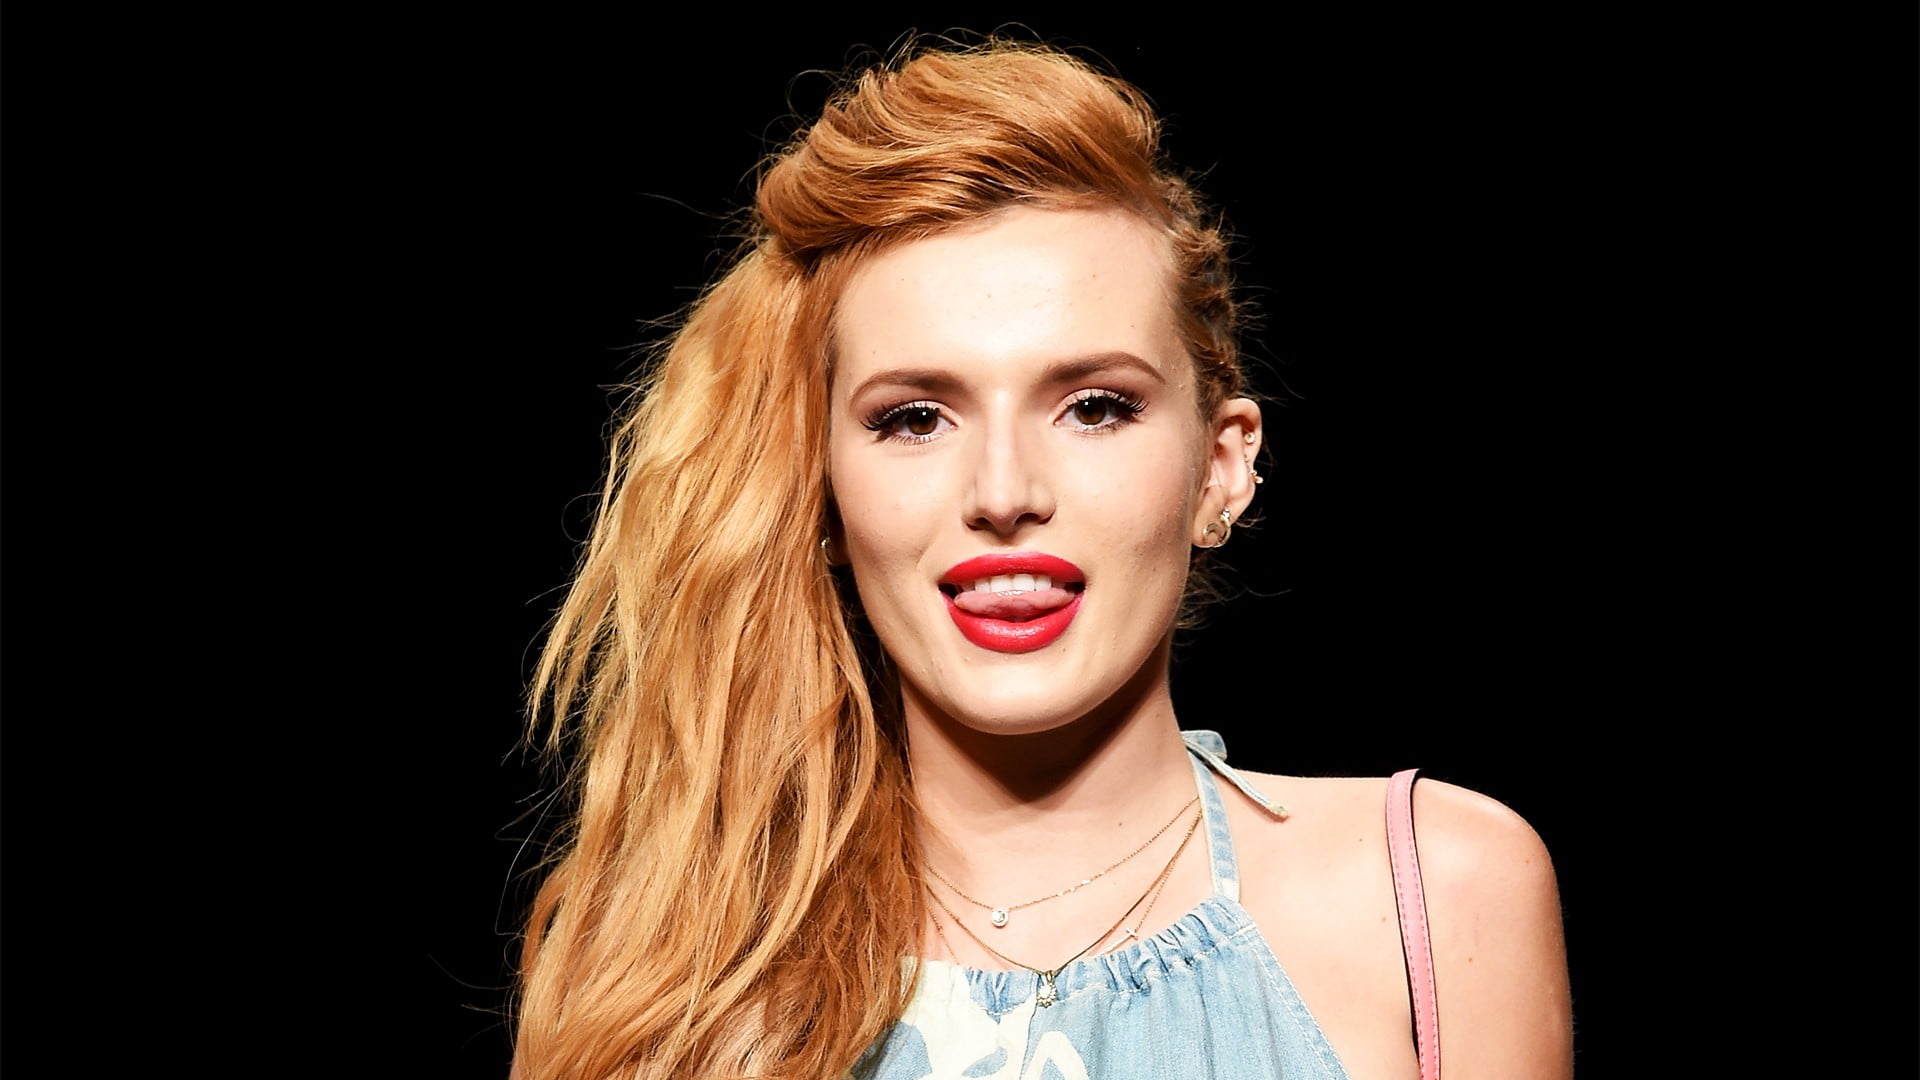 Bella Thorne, tongues, red lipstick, women, necklace, face